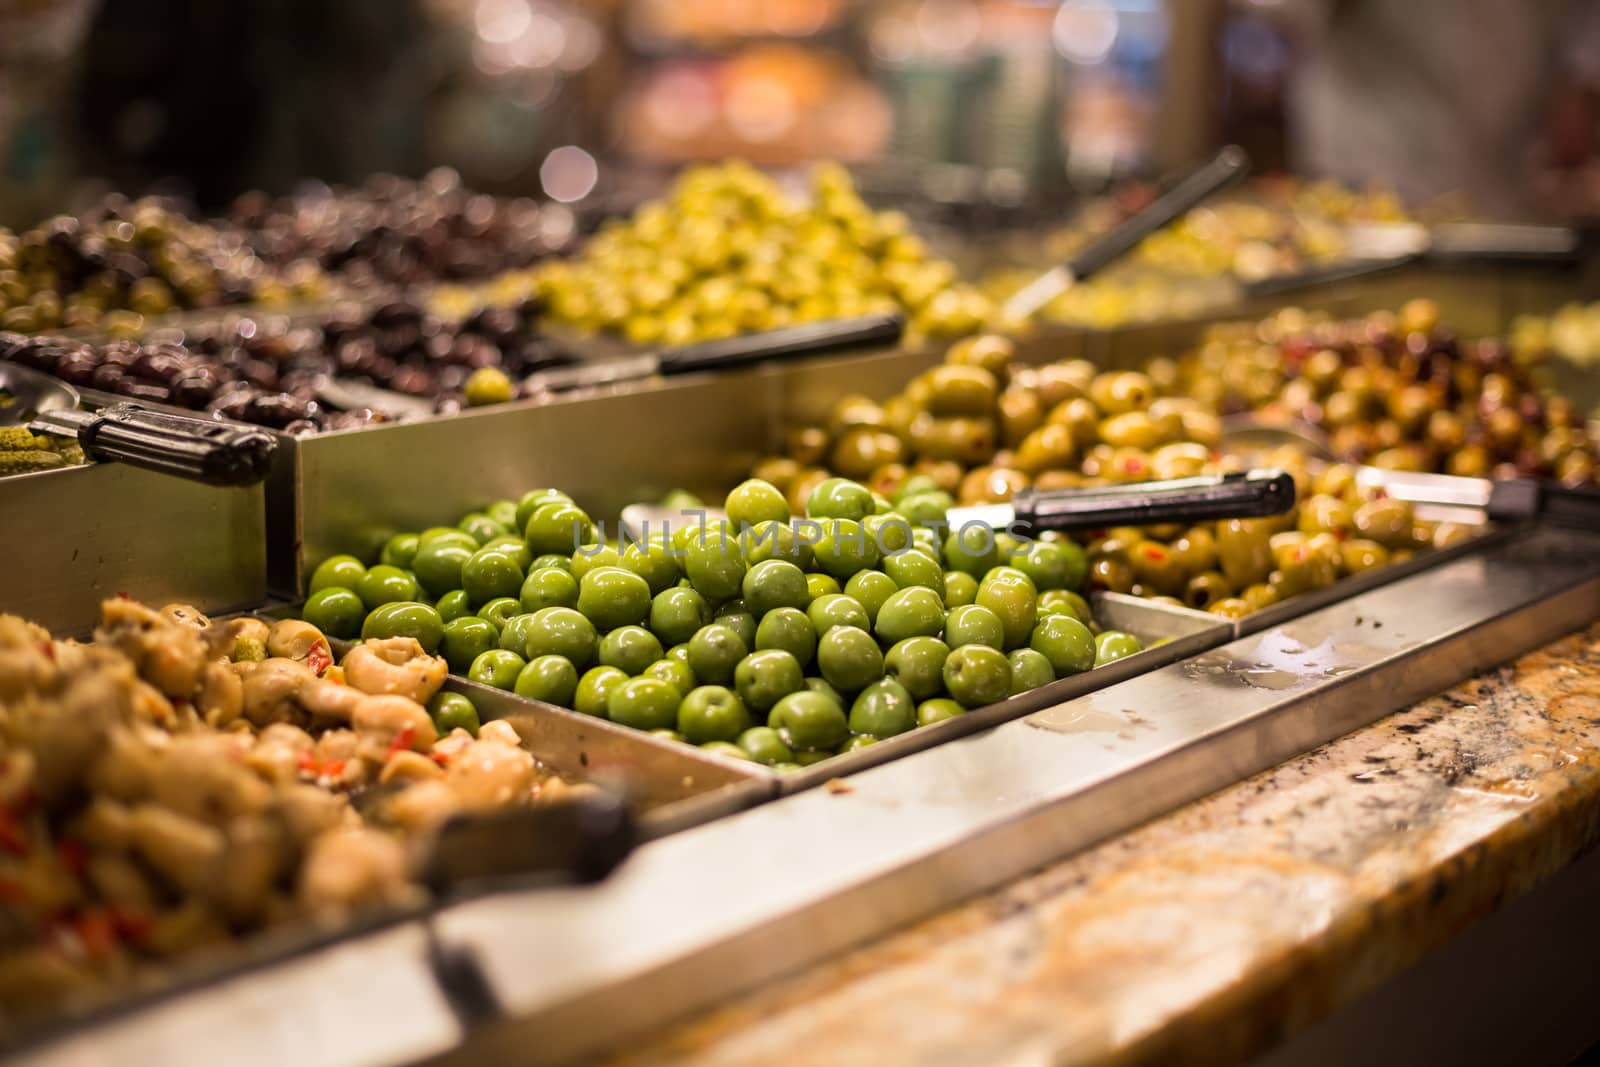 Olives on sale/display in a food market/grocery store by viktor_cap